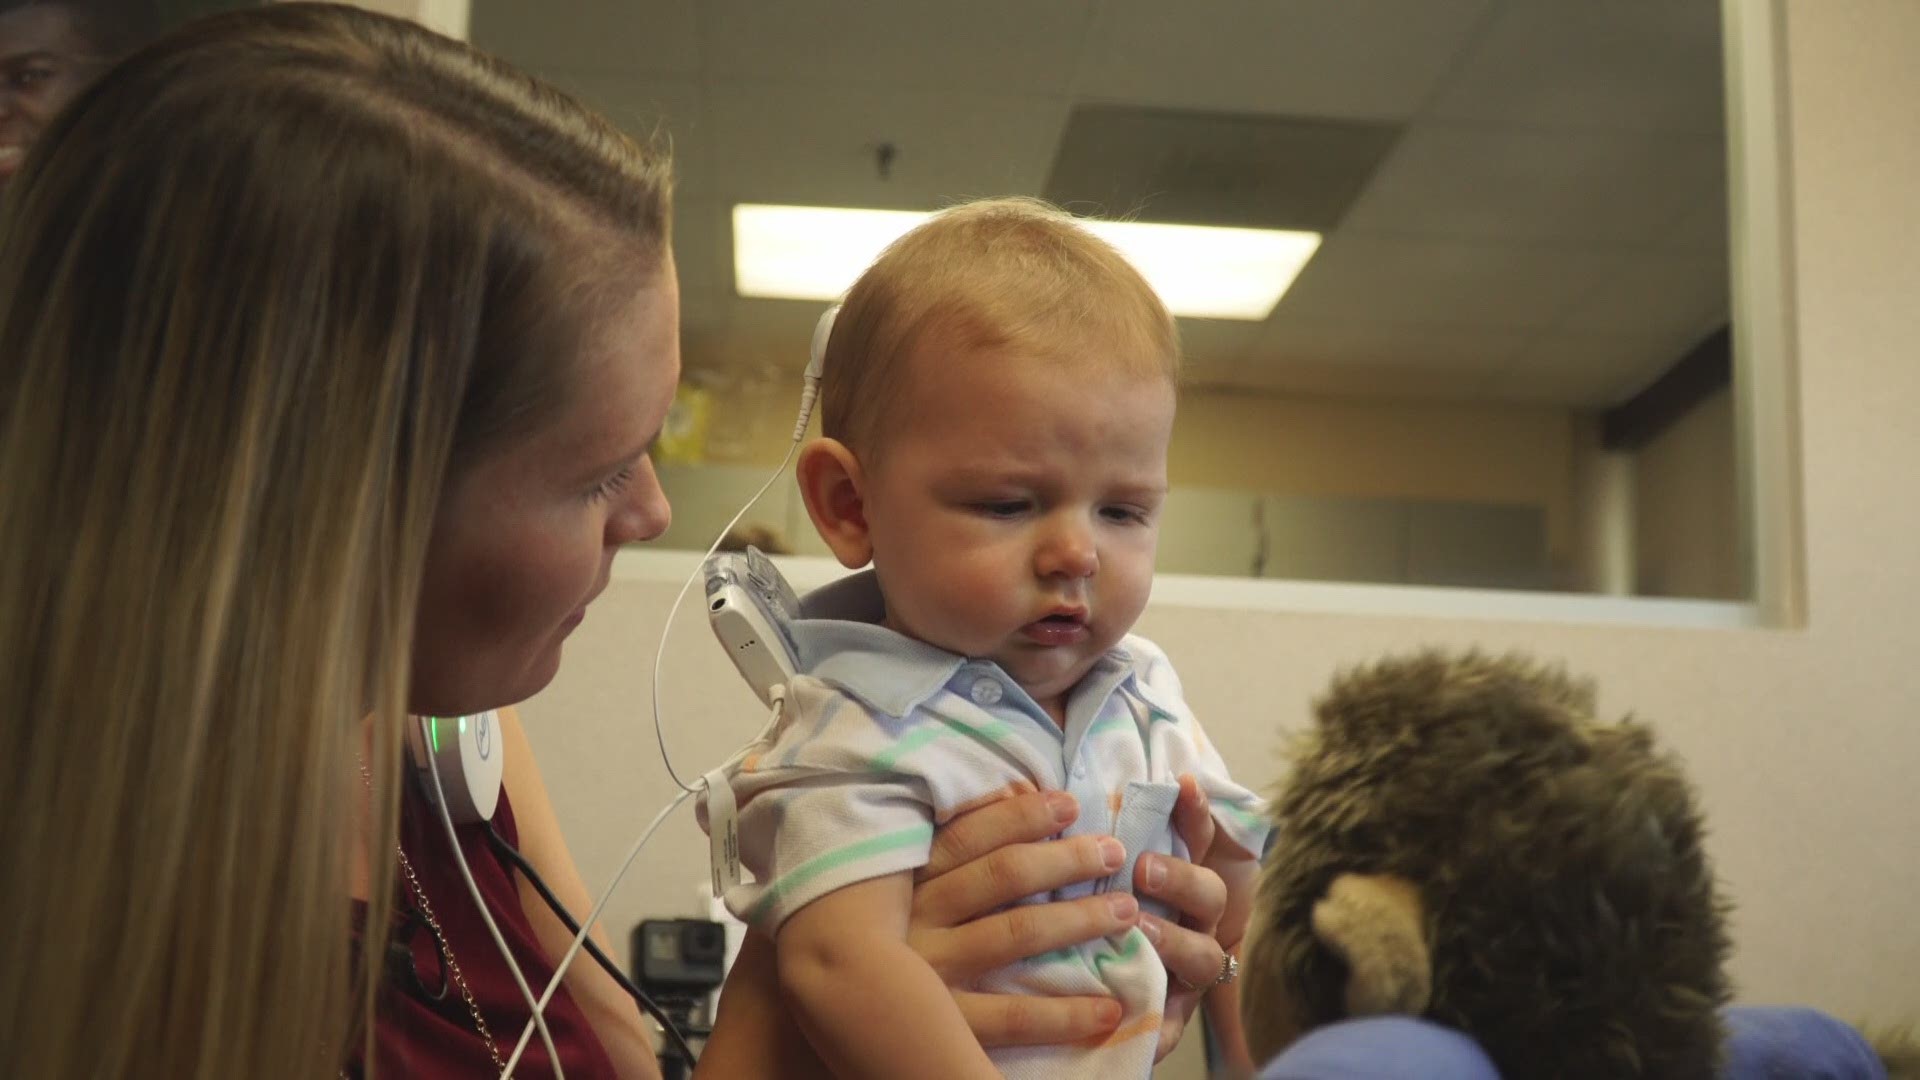 Brady Burley, who lives with Connexin 26 Disorder, heard for the first time thanks to a Cochlear implant from Dr. Loren Bartels.